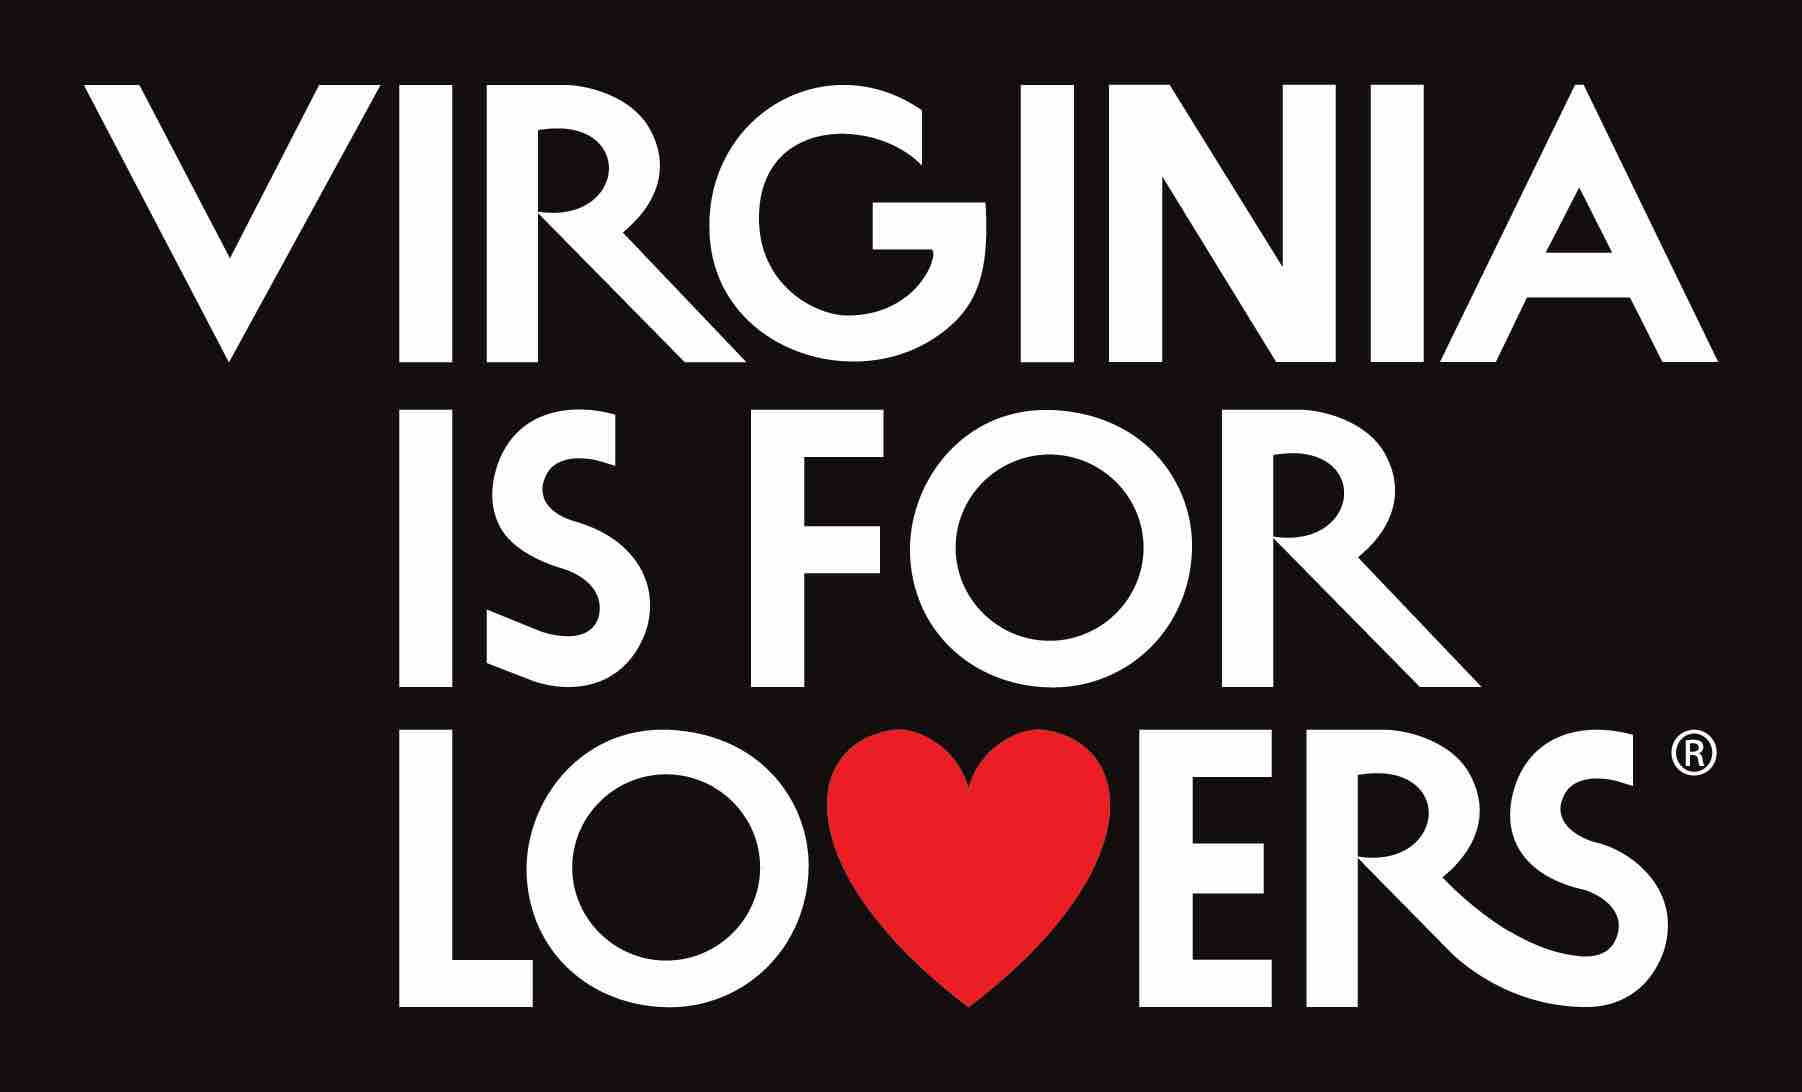 Virginia is for Lovers Logo